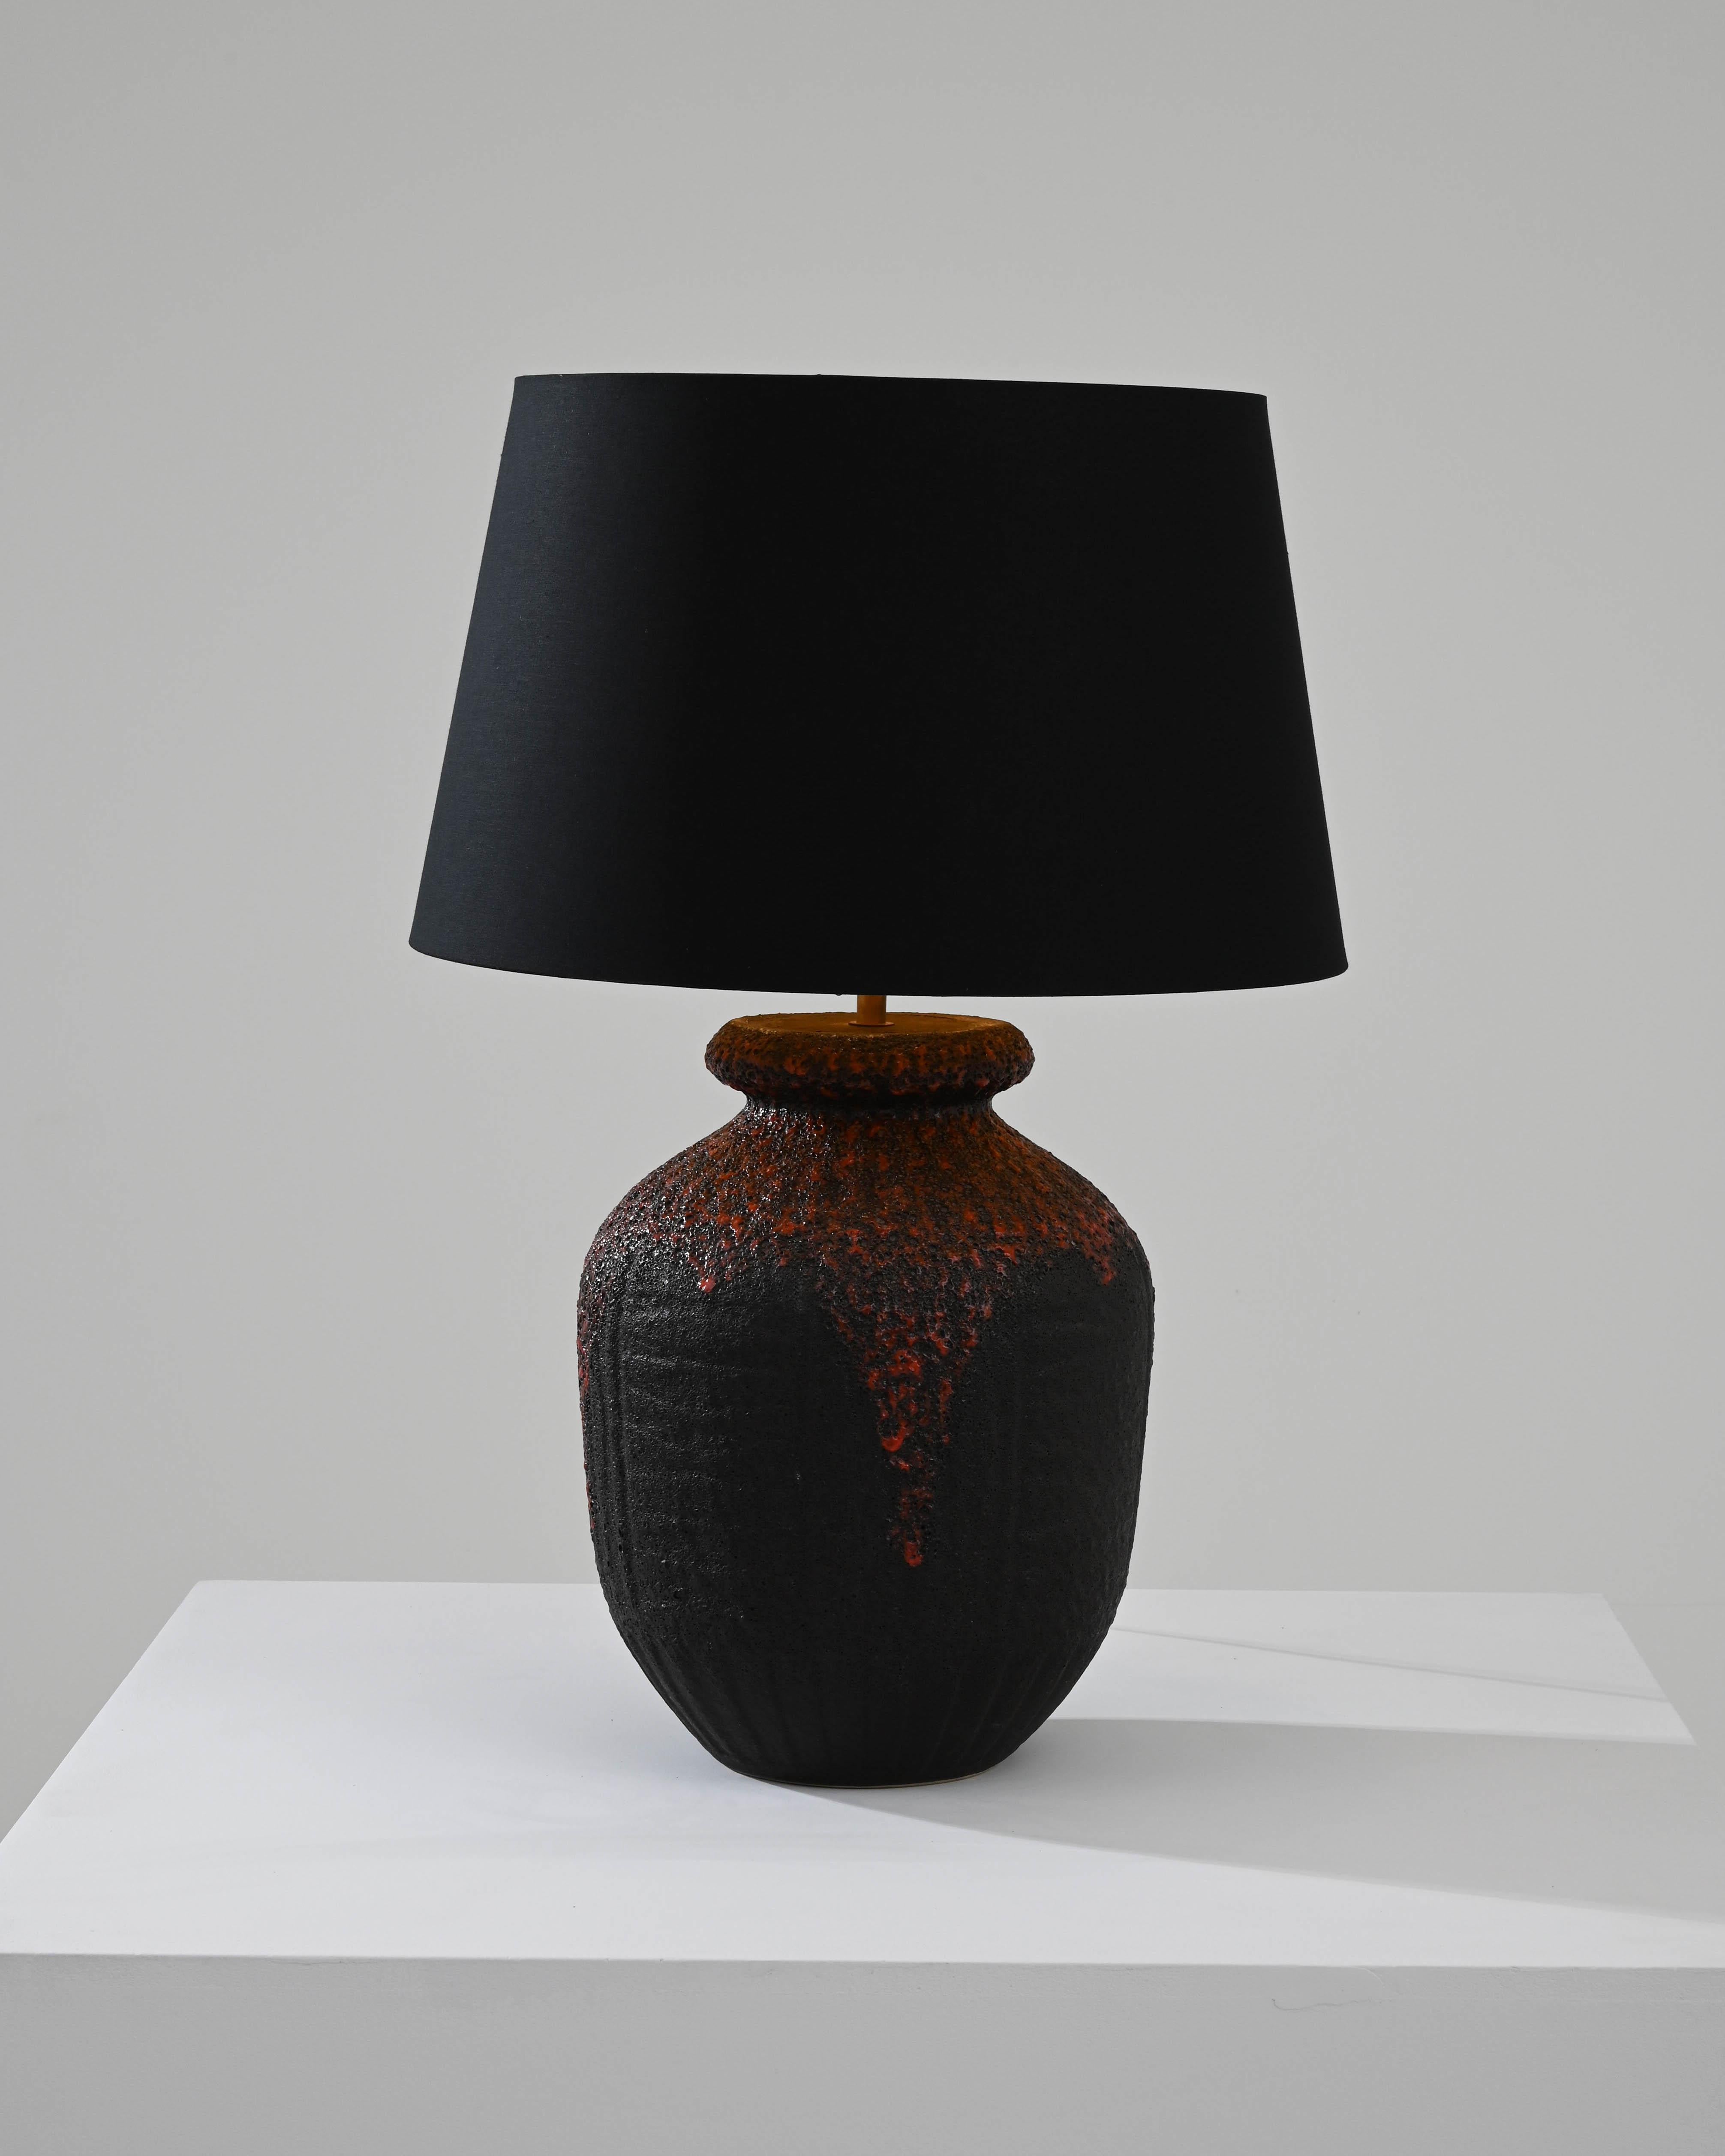 Enrich your living space with the captivating allure of this 1960s German Ceramic Table Lamp. The lamp features a textured black base that exudes a sense of sophistication and depth. Transitioning seamlessly, the top of the base introduces a vibrant